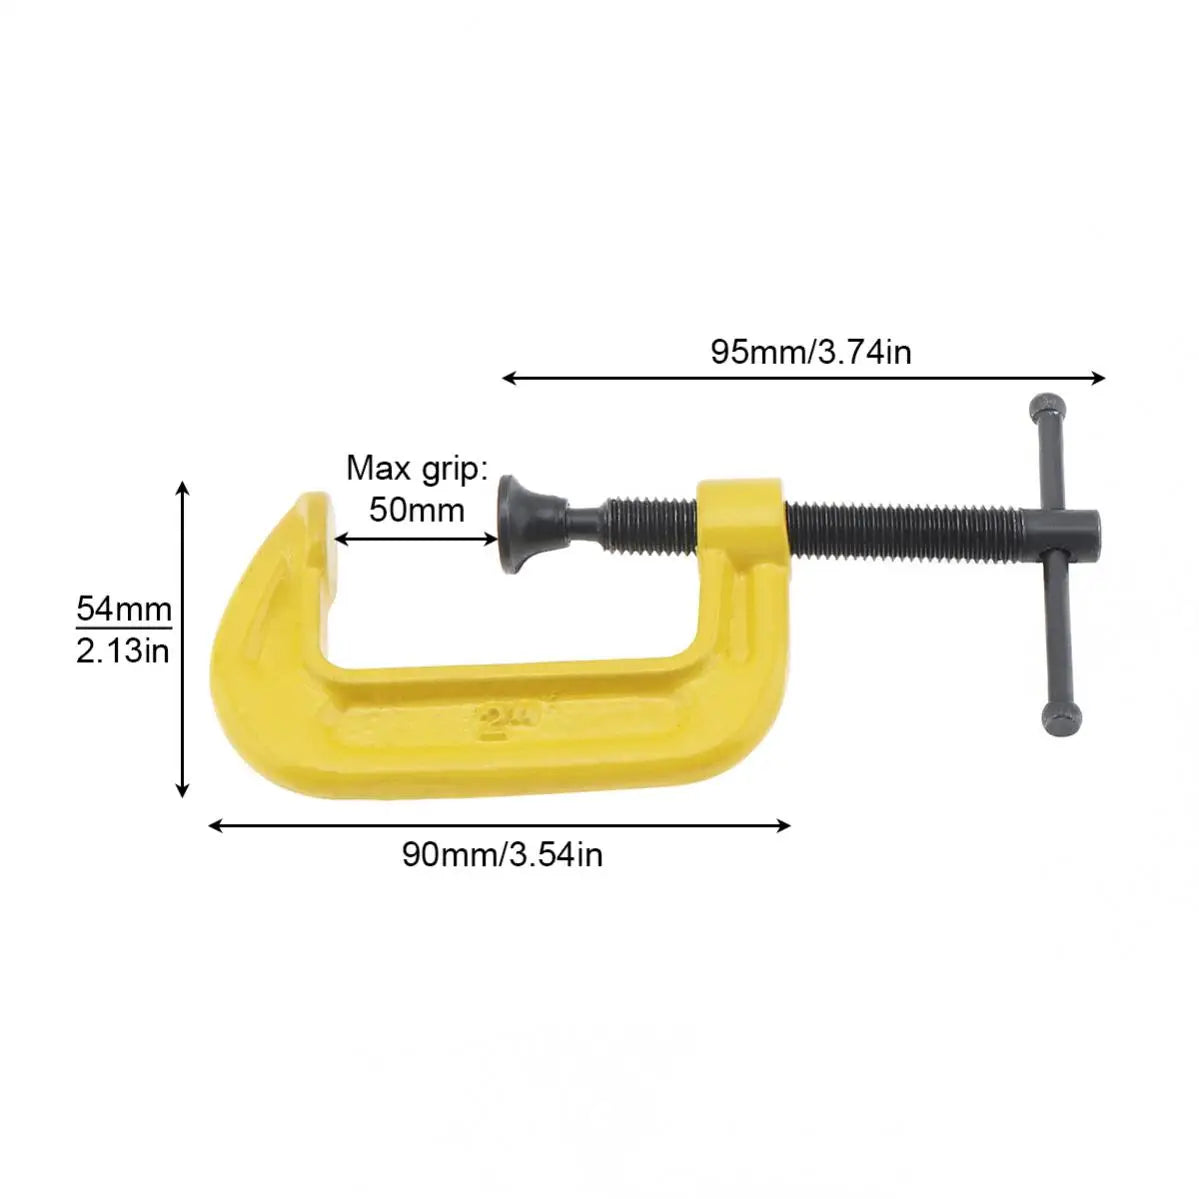 2 Inch Mini G Clamp Heavy Duty 50mm Grip Clamping Multi-Function Clamp